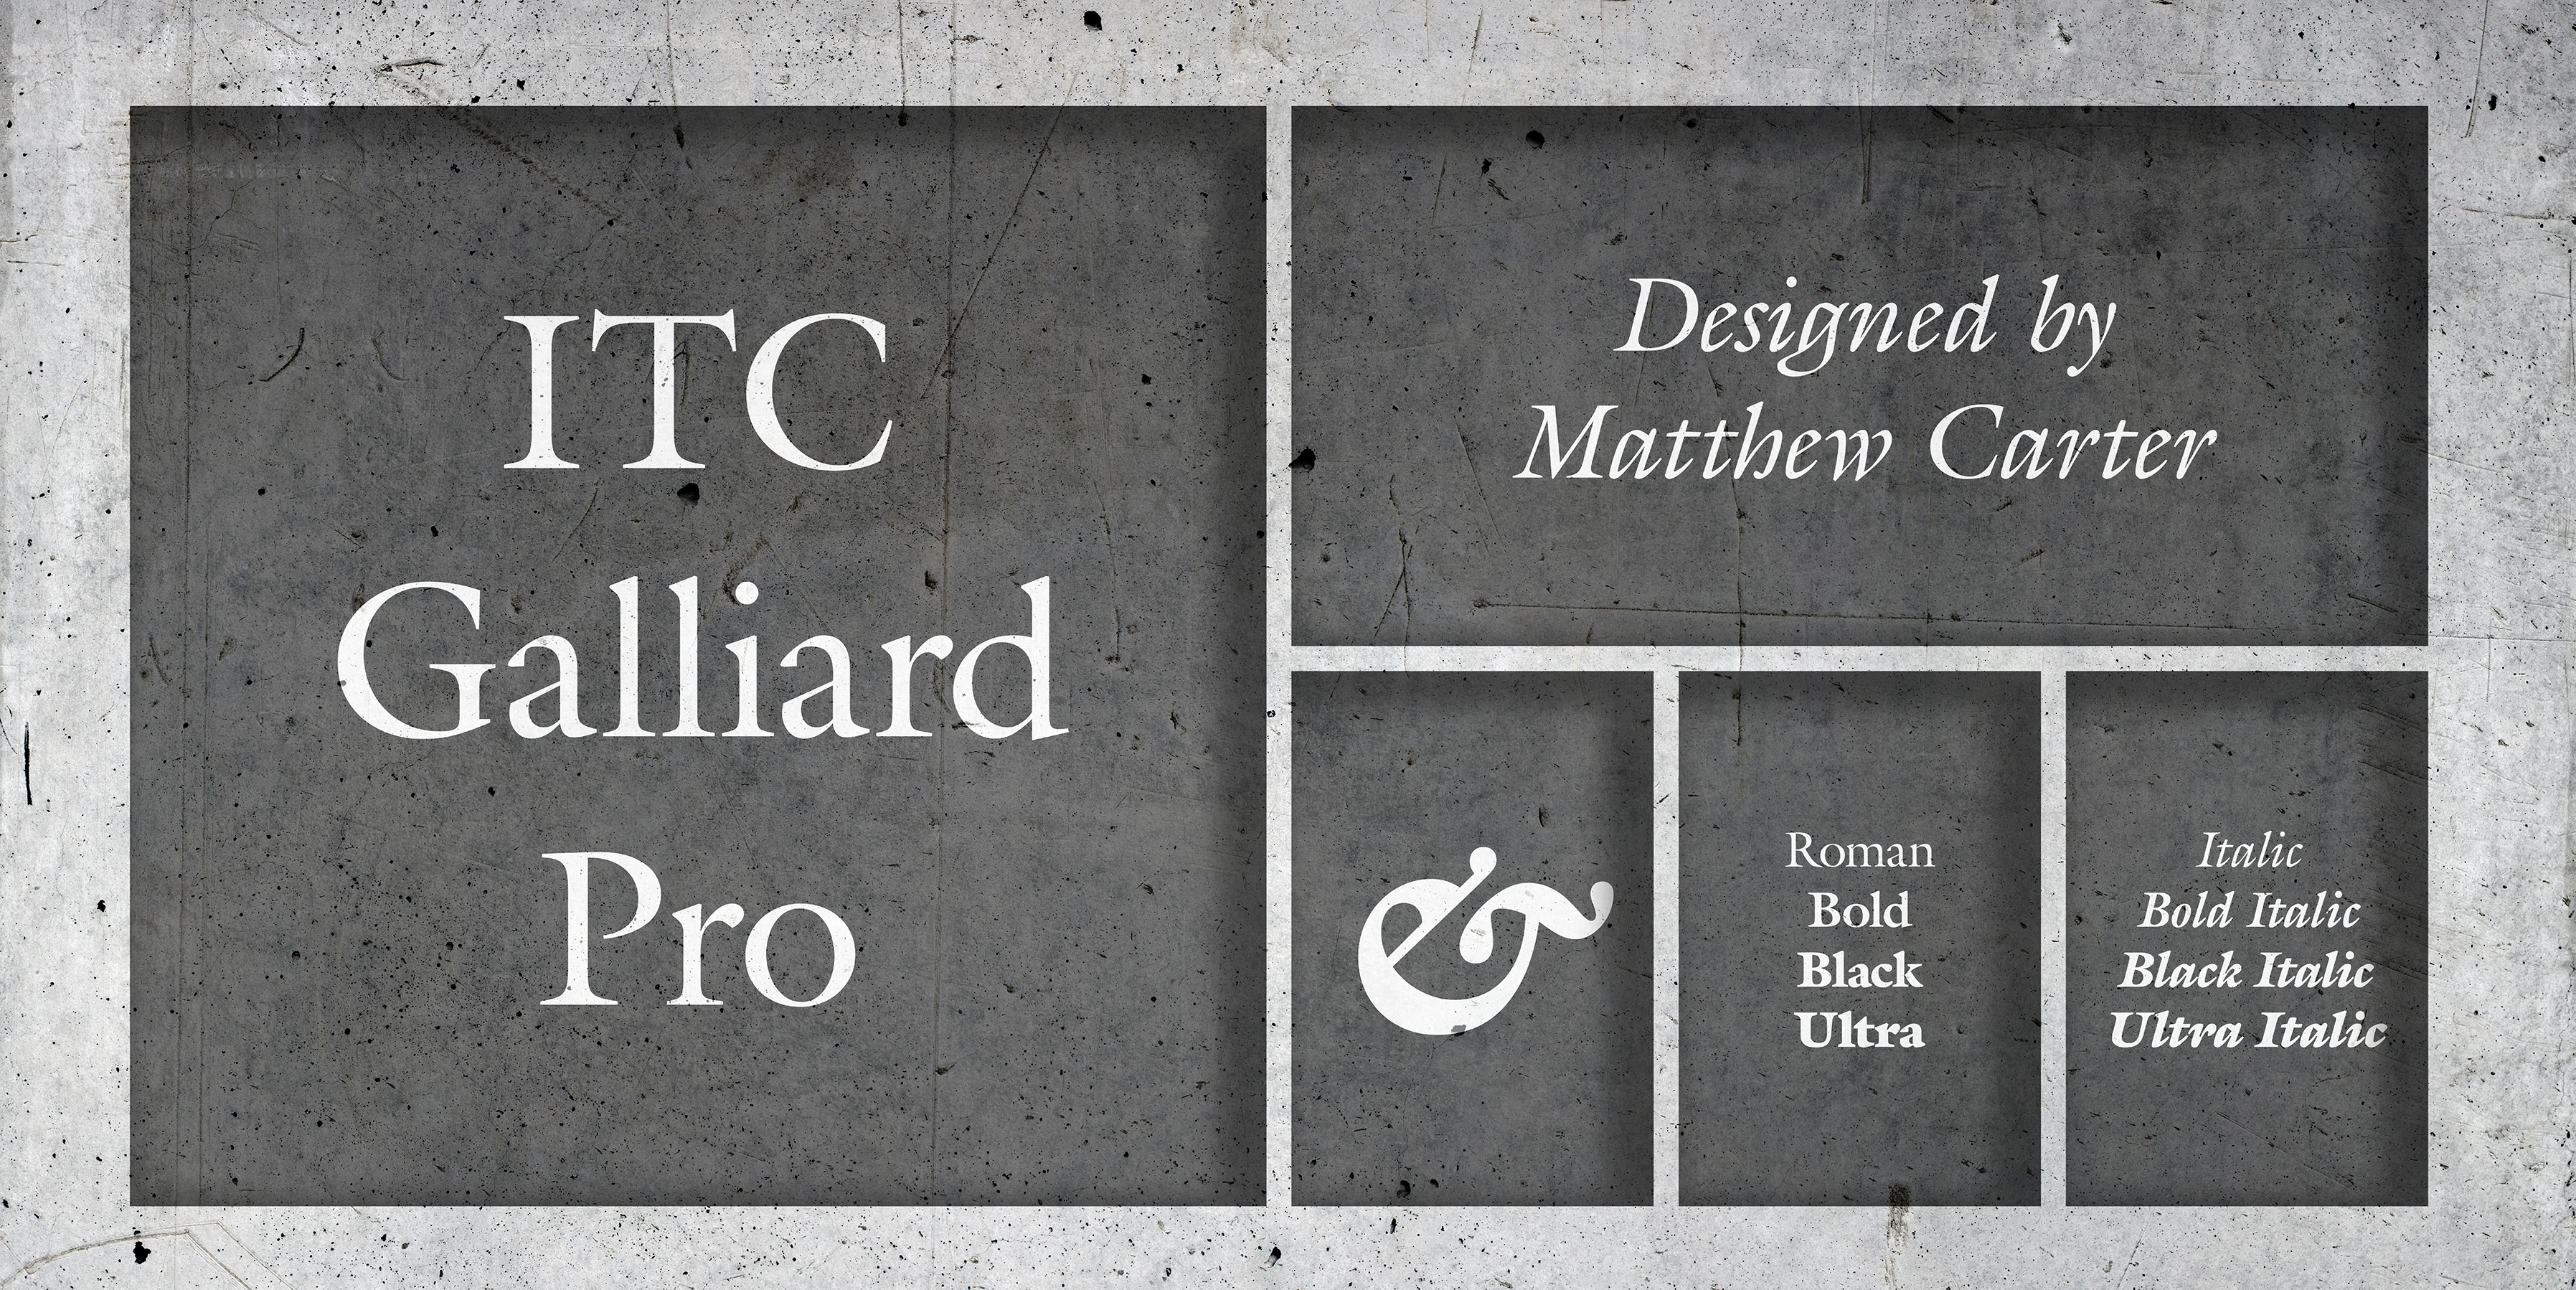 Card displaying ITC Galliard typeface in various styles